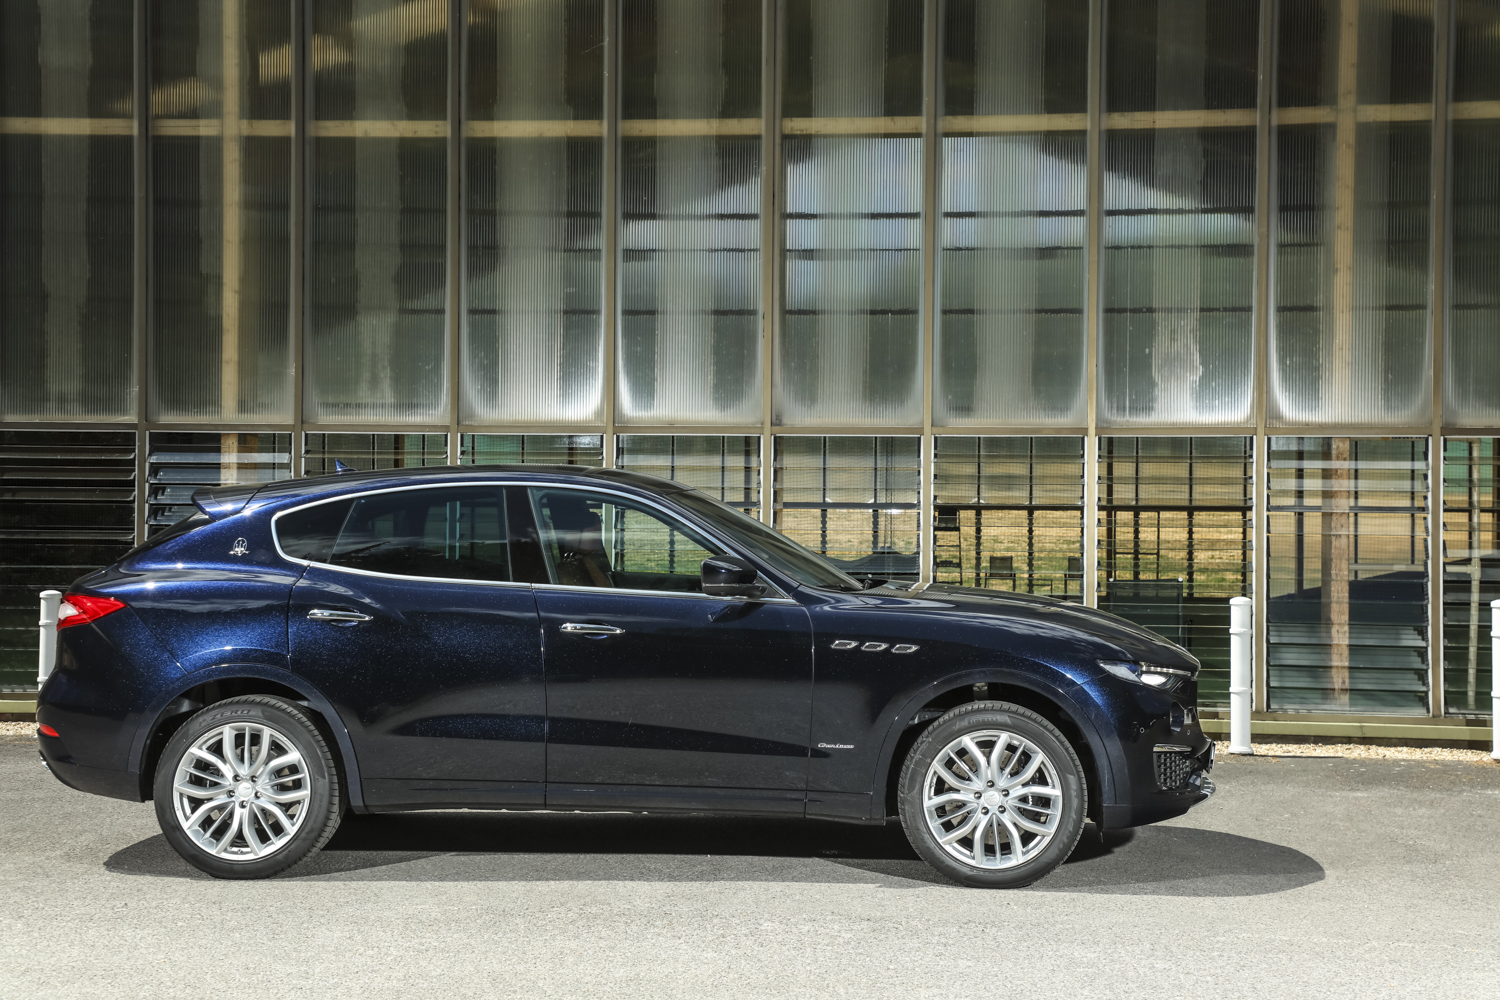 maserati levante suv family friendly review press images crop 4